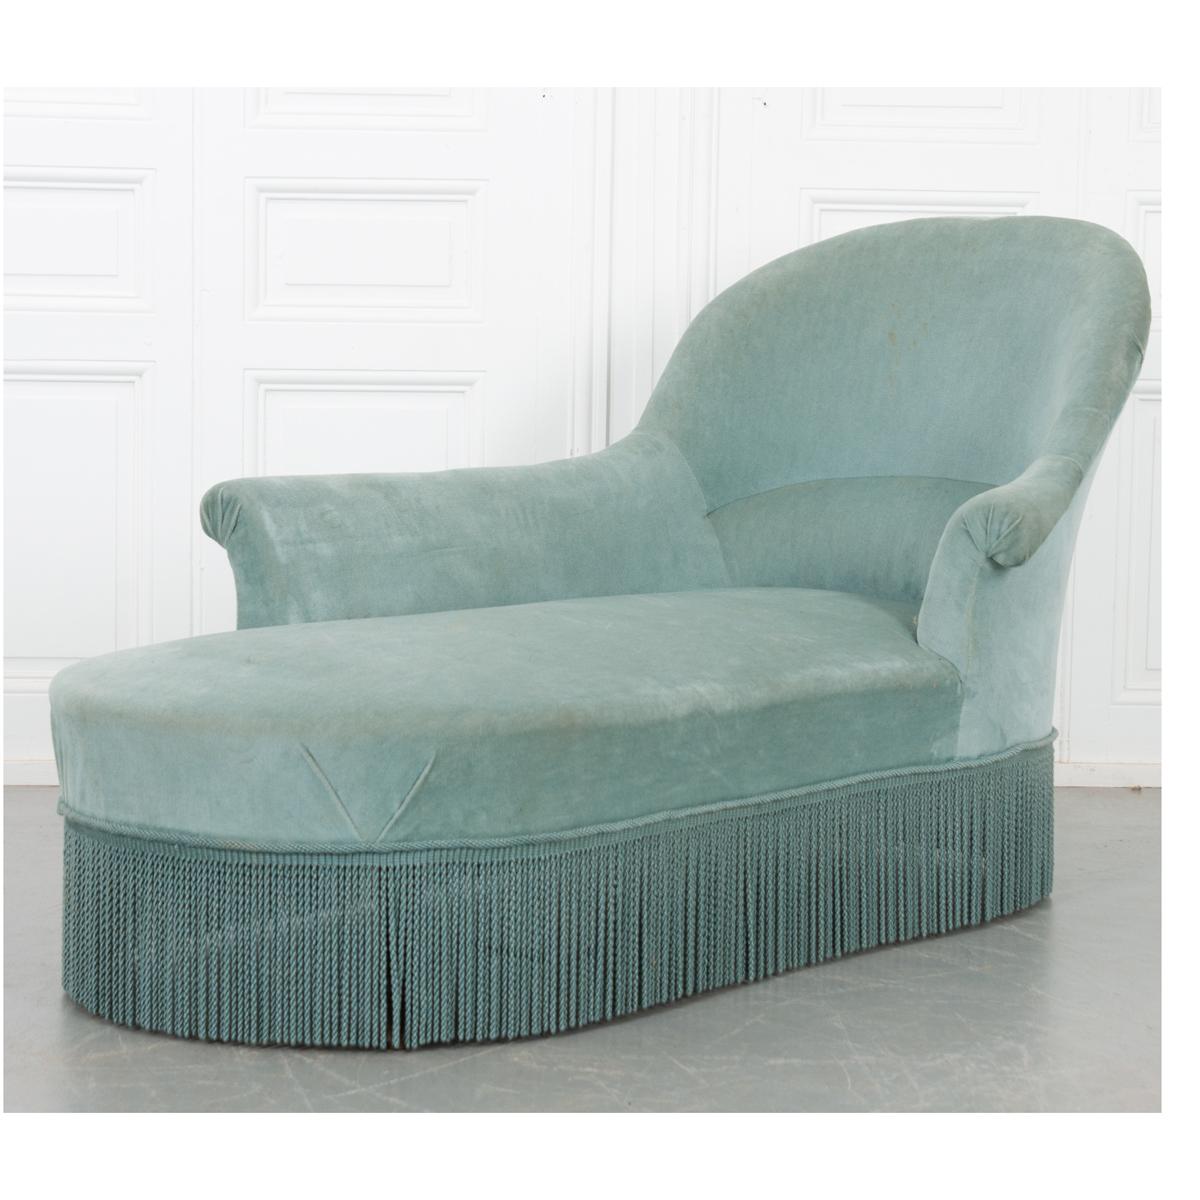 vintage chaise lounge